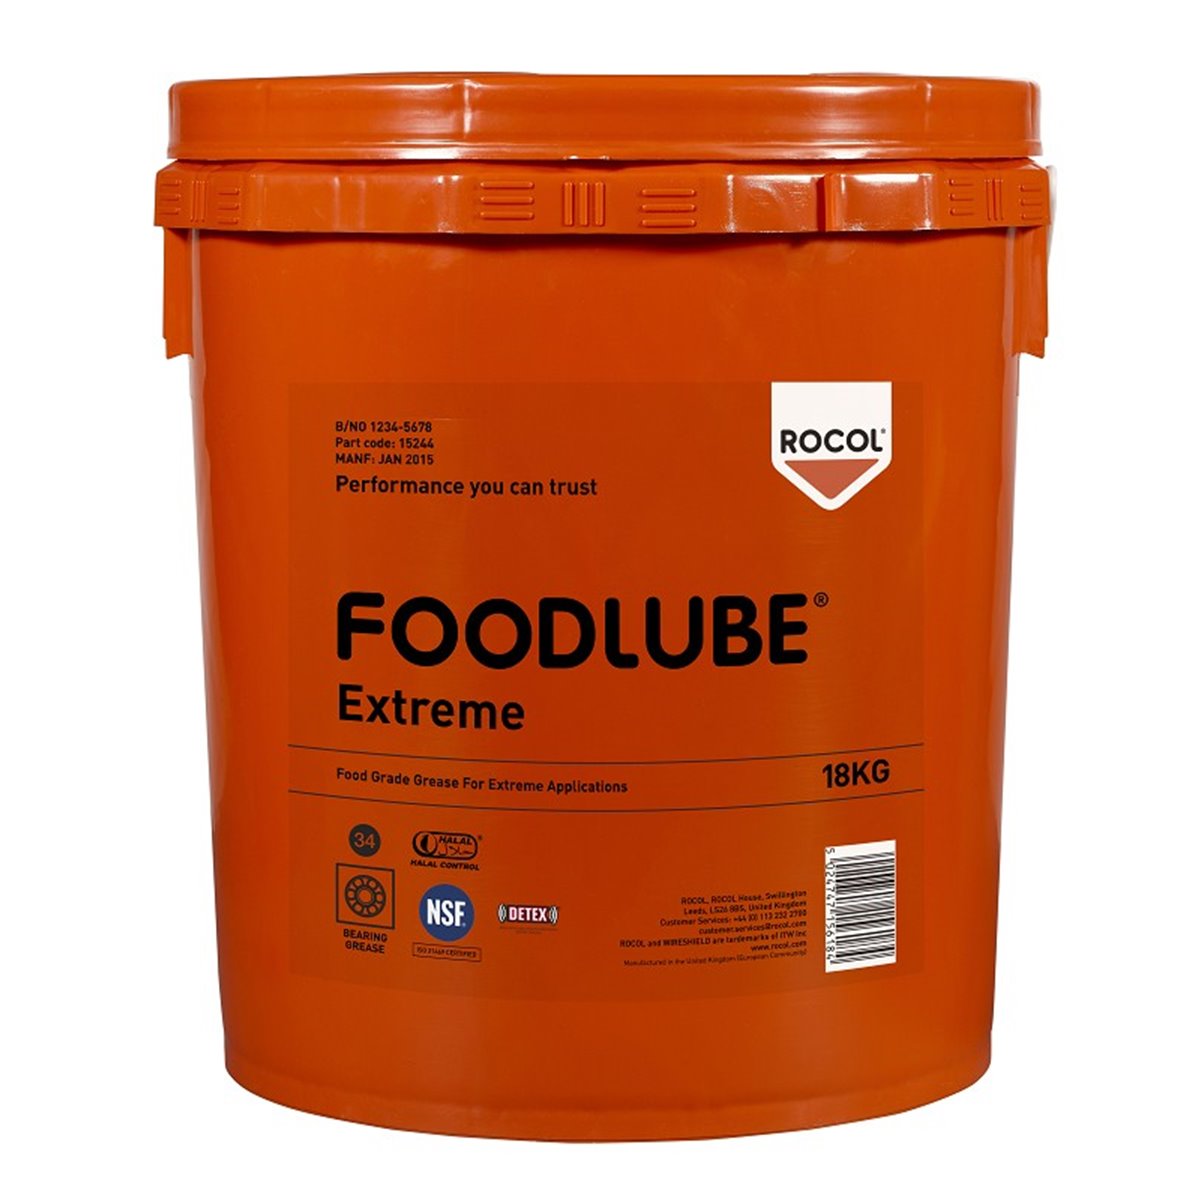 FOODLUBE Extreme Rocol 18kg RS15244